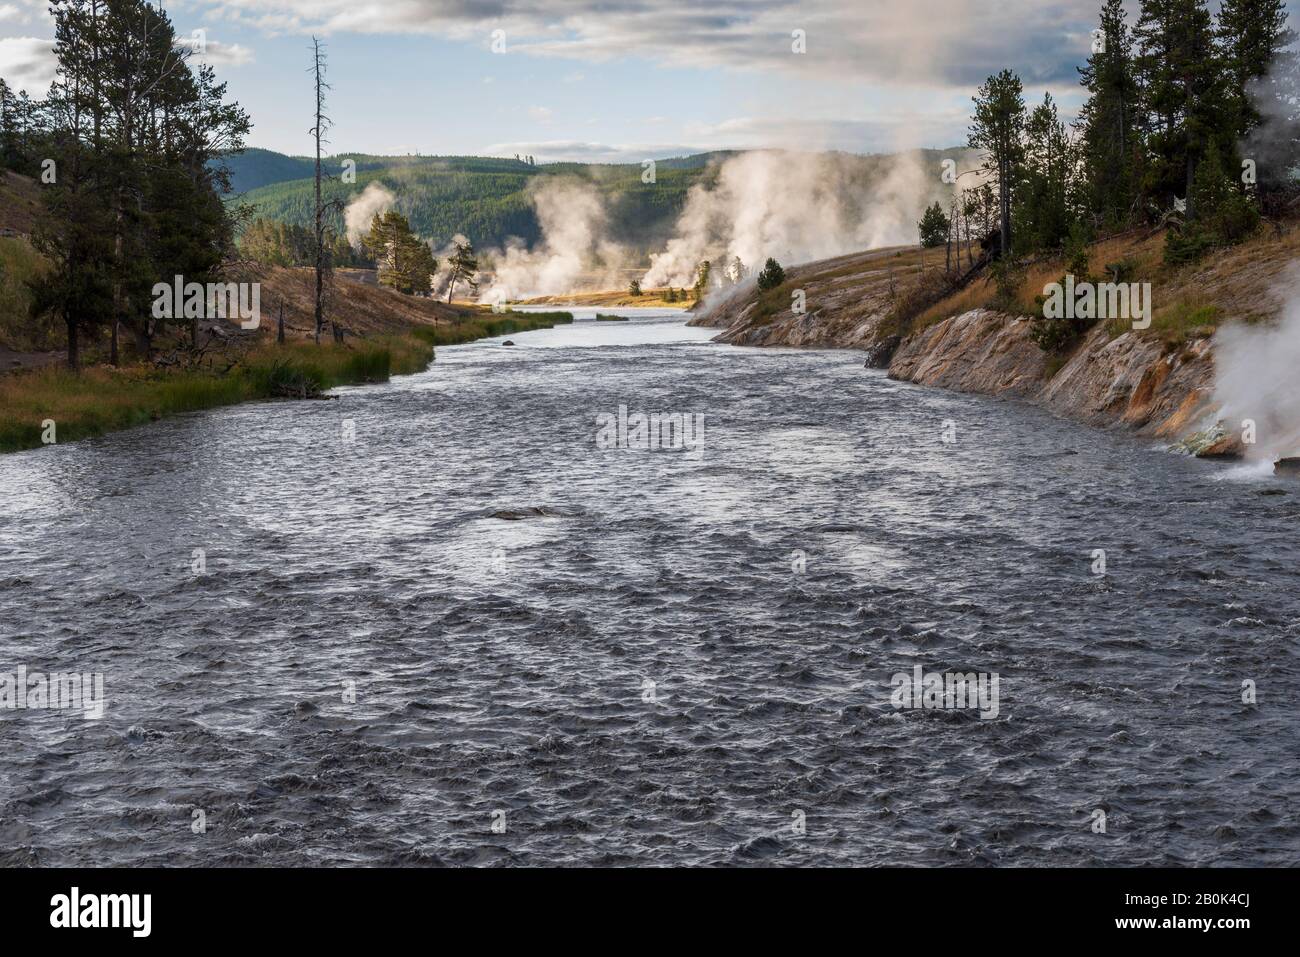 Fast moving river flowing towards geysers venting steam and forested hills. Stock Photo